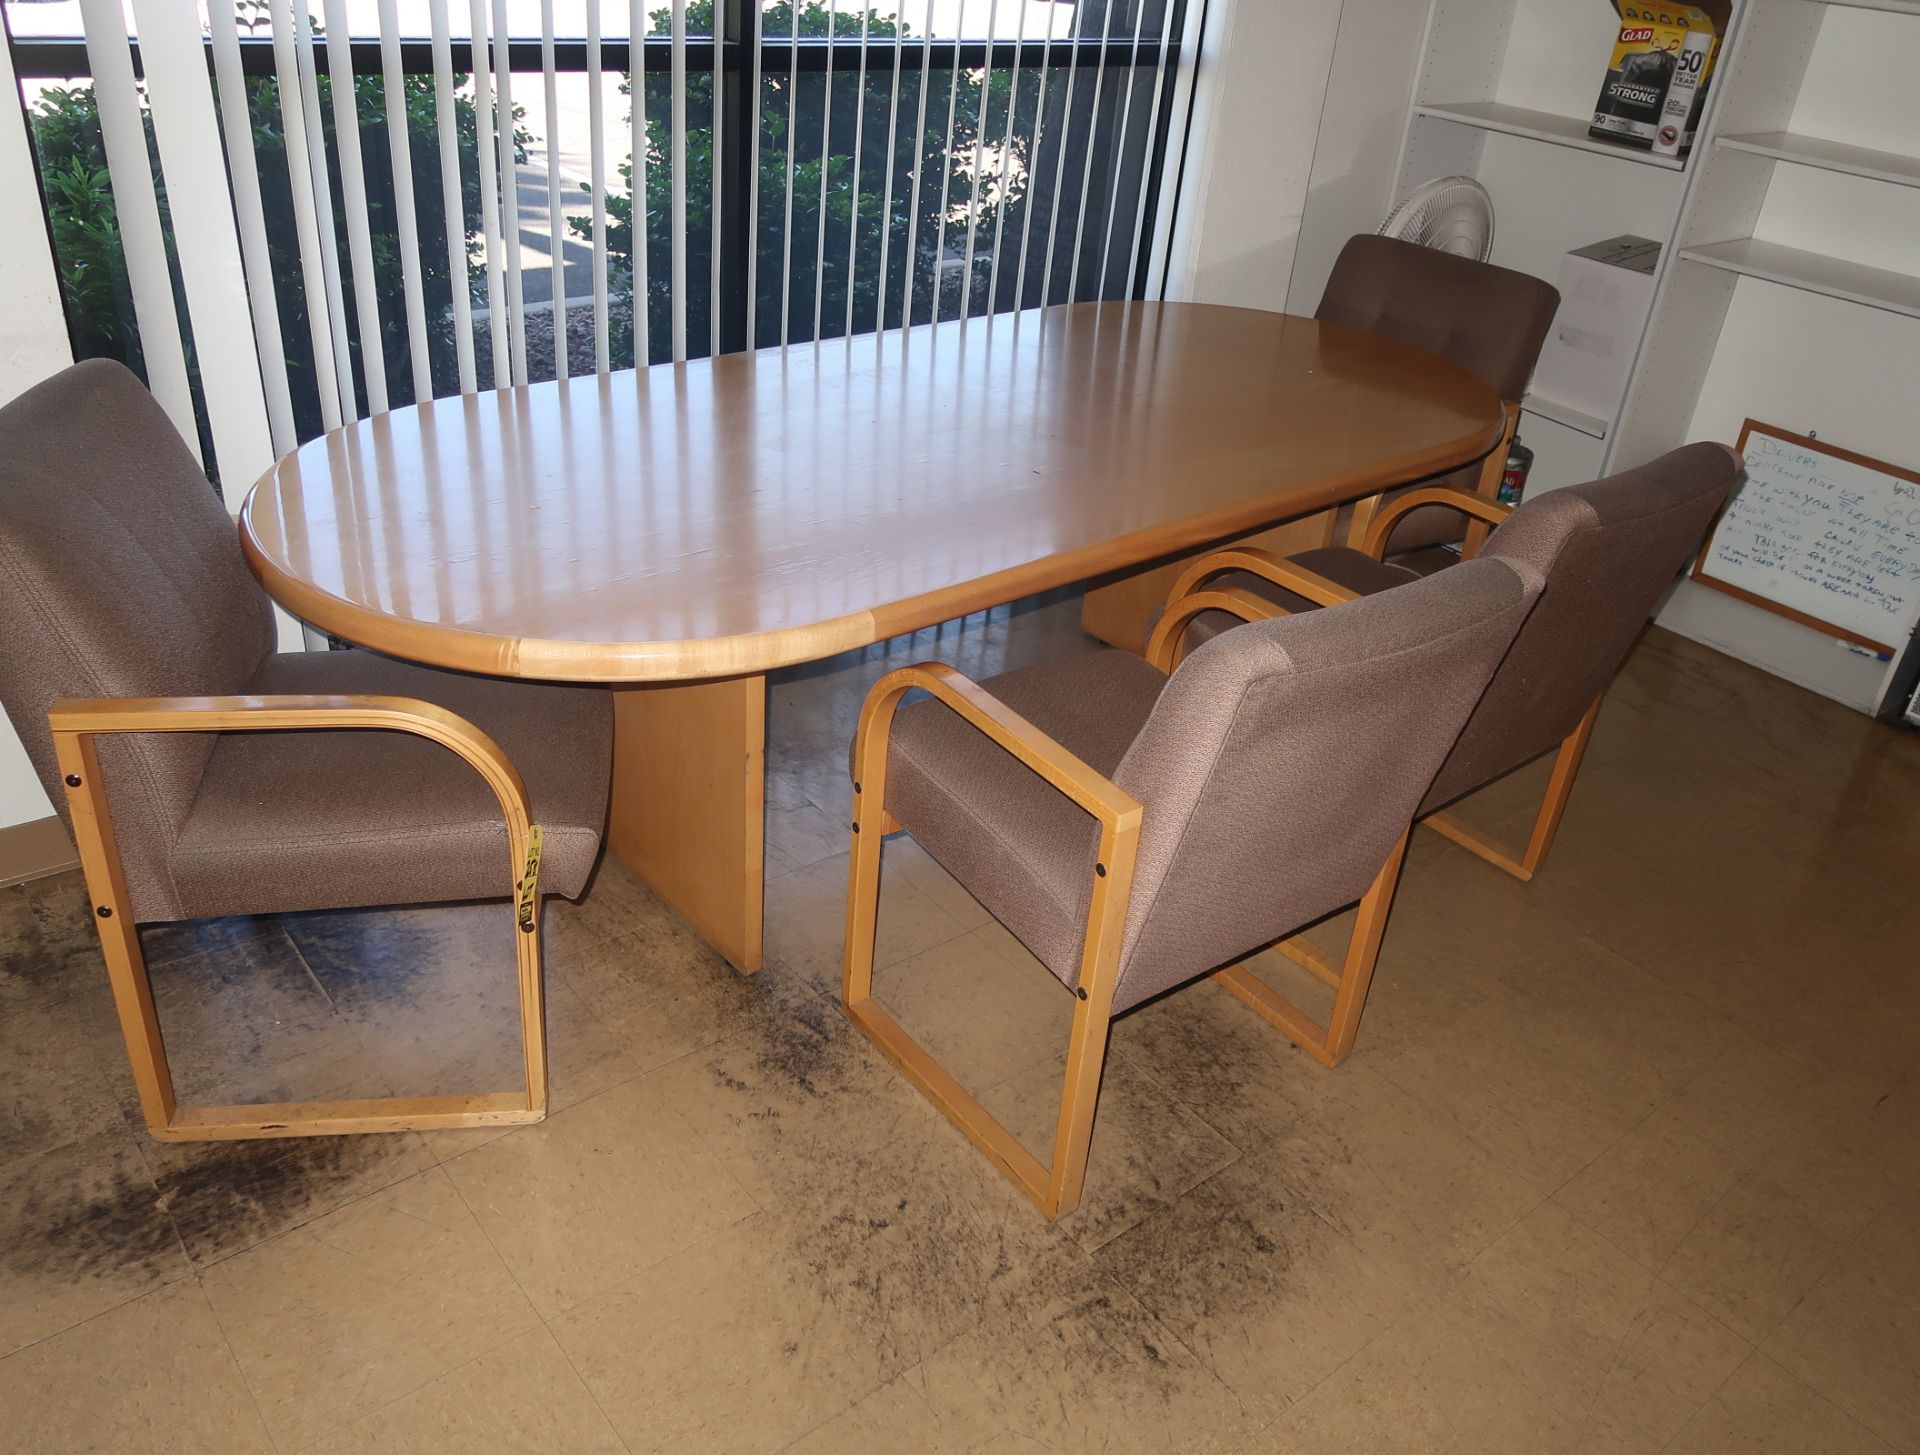 LOT BREAKROOM TABLE & CHAIRS